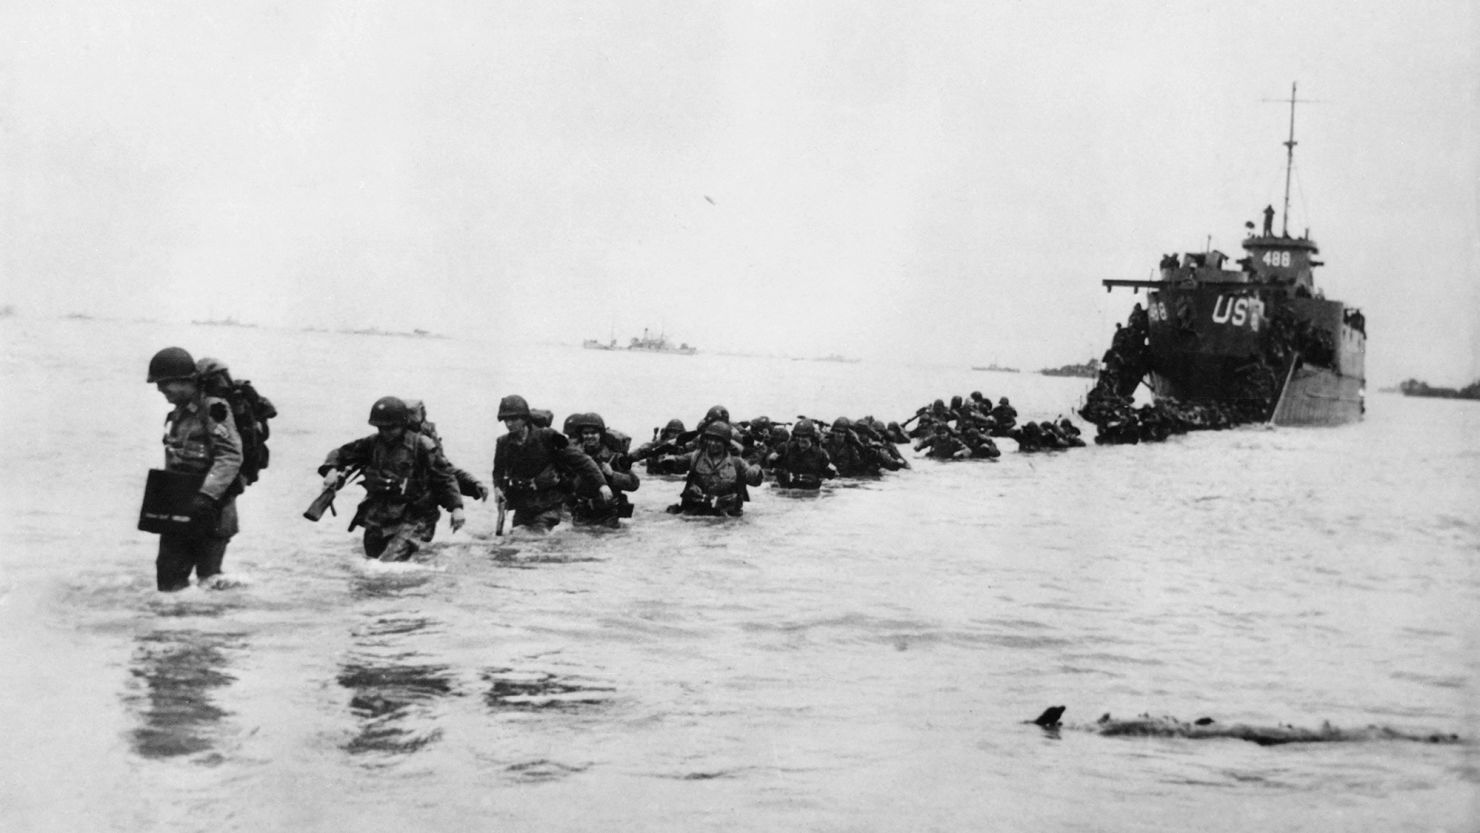 Allied forces are seen landing on the beaches of Normandy on June 6, 1944. Thursday will mark the 80th anniversary of D-Day.